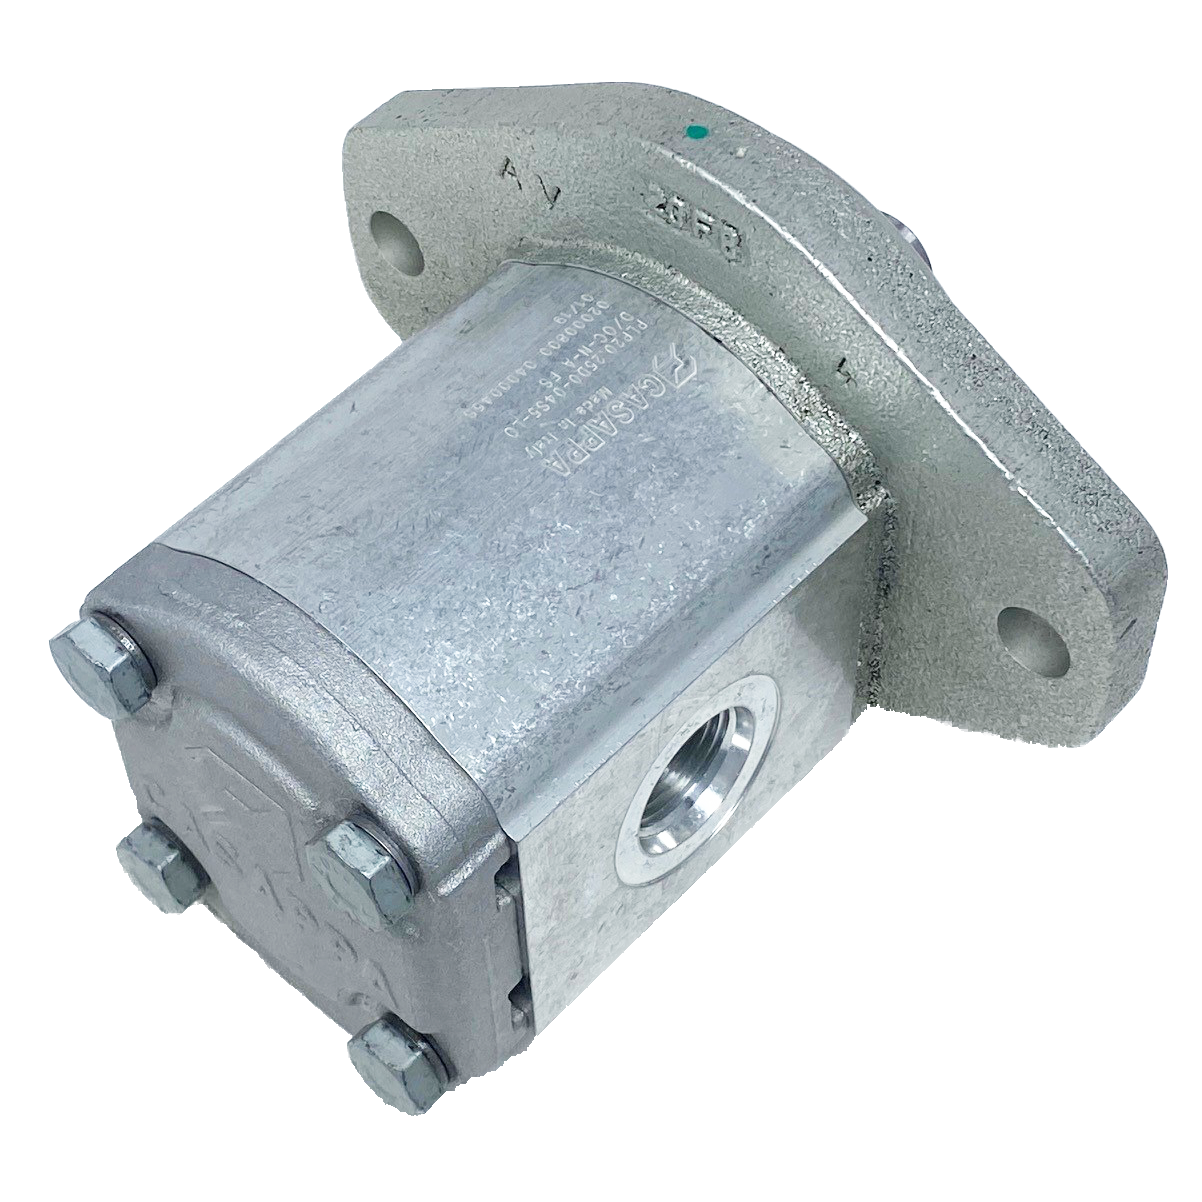 PHM20.25B0-32S5-LOC/OG-N-L : Casappa Polaris Gear Motor, 26.42cc, 3335psi, 3000RPM, Reversible Interior Drain, 3/4" Bore x 1/4" Key Shaft, SAE B 2-Bolt Flange, 0.625 (5/8") #10 SAE In, 1.25" #20 SAE Out, Cast Iron Body Cast Iron Flange And Cover